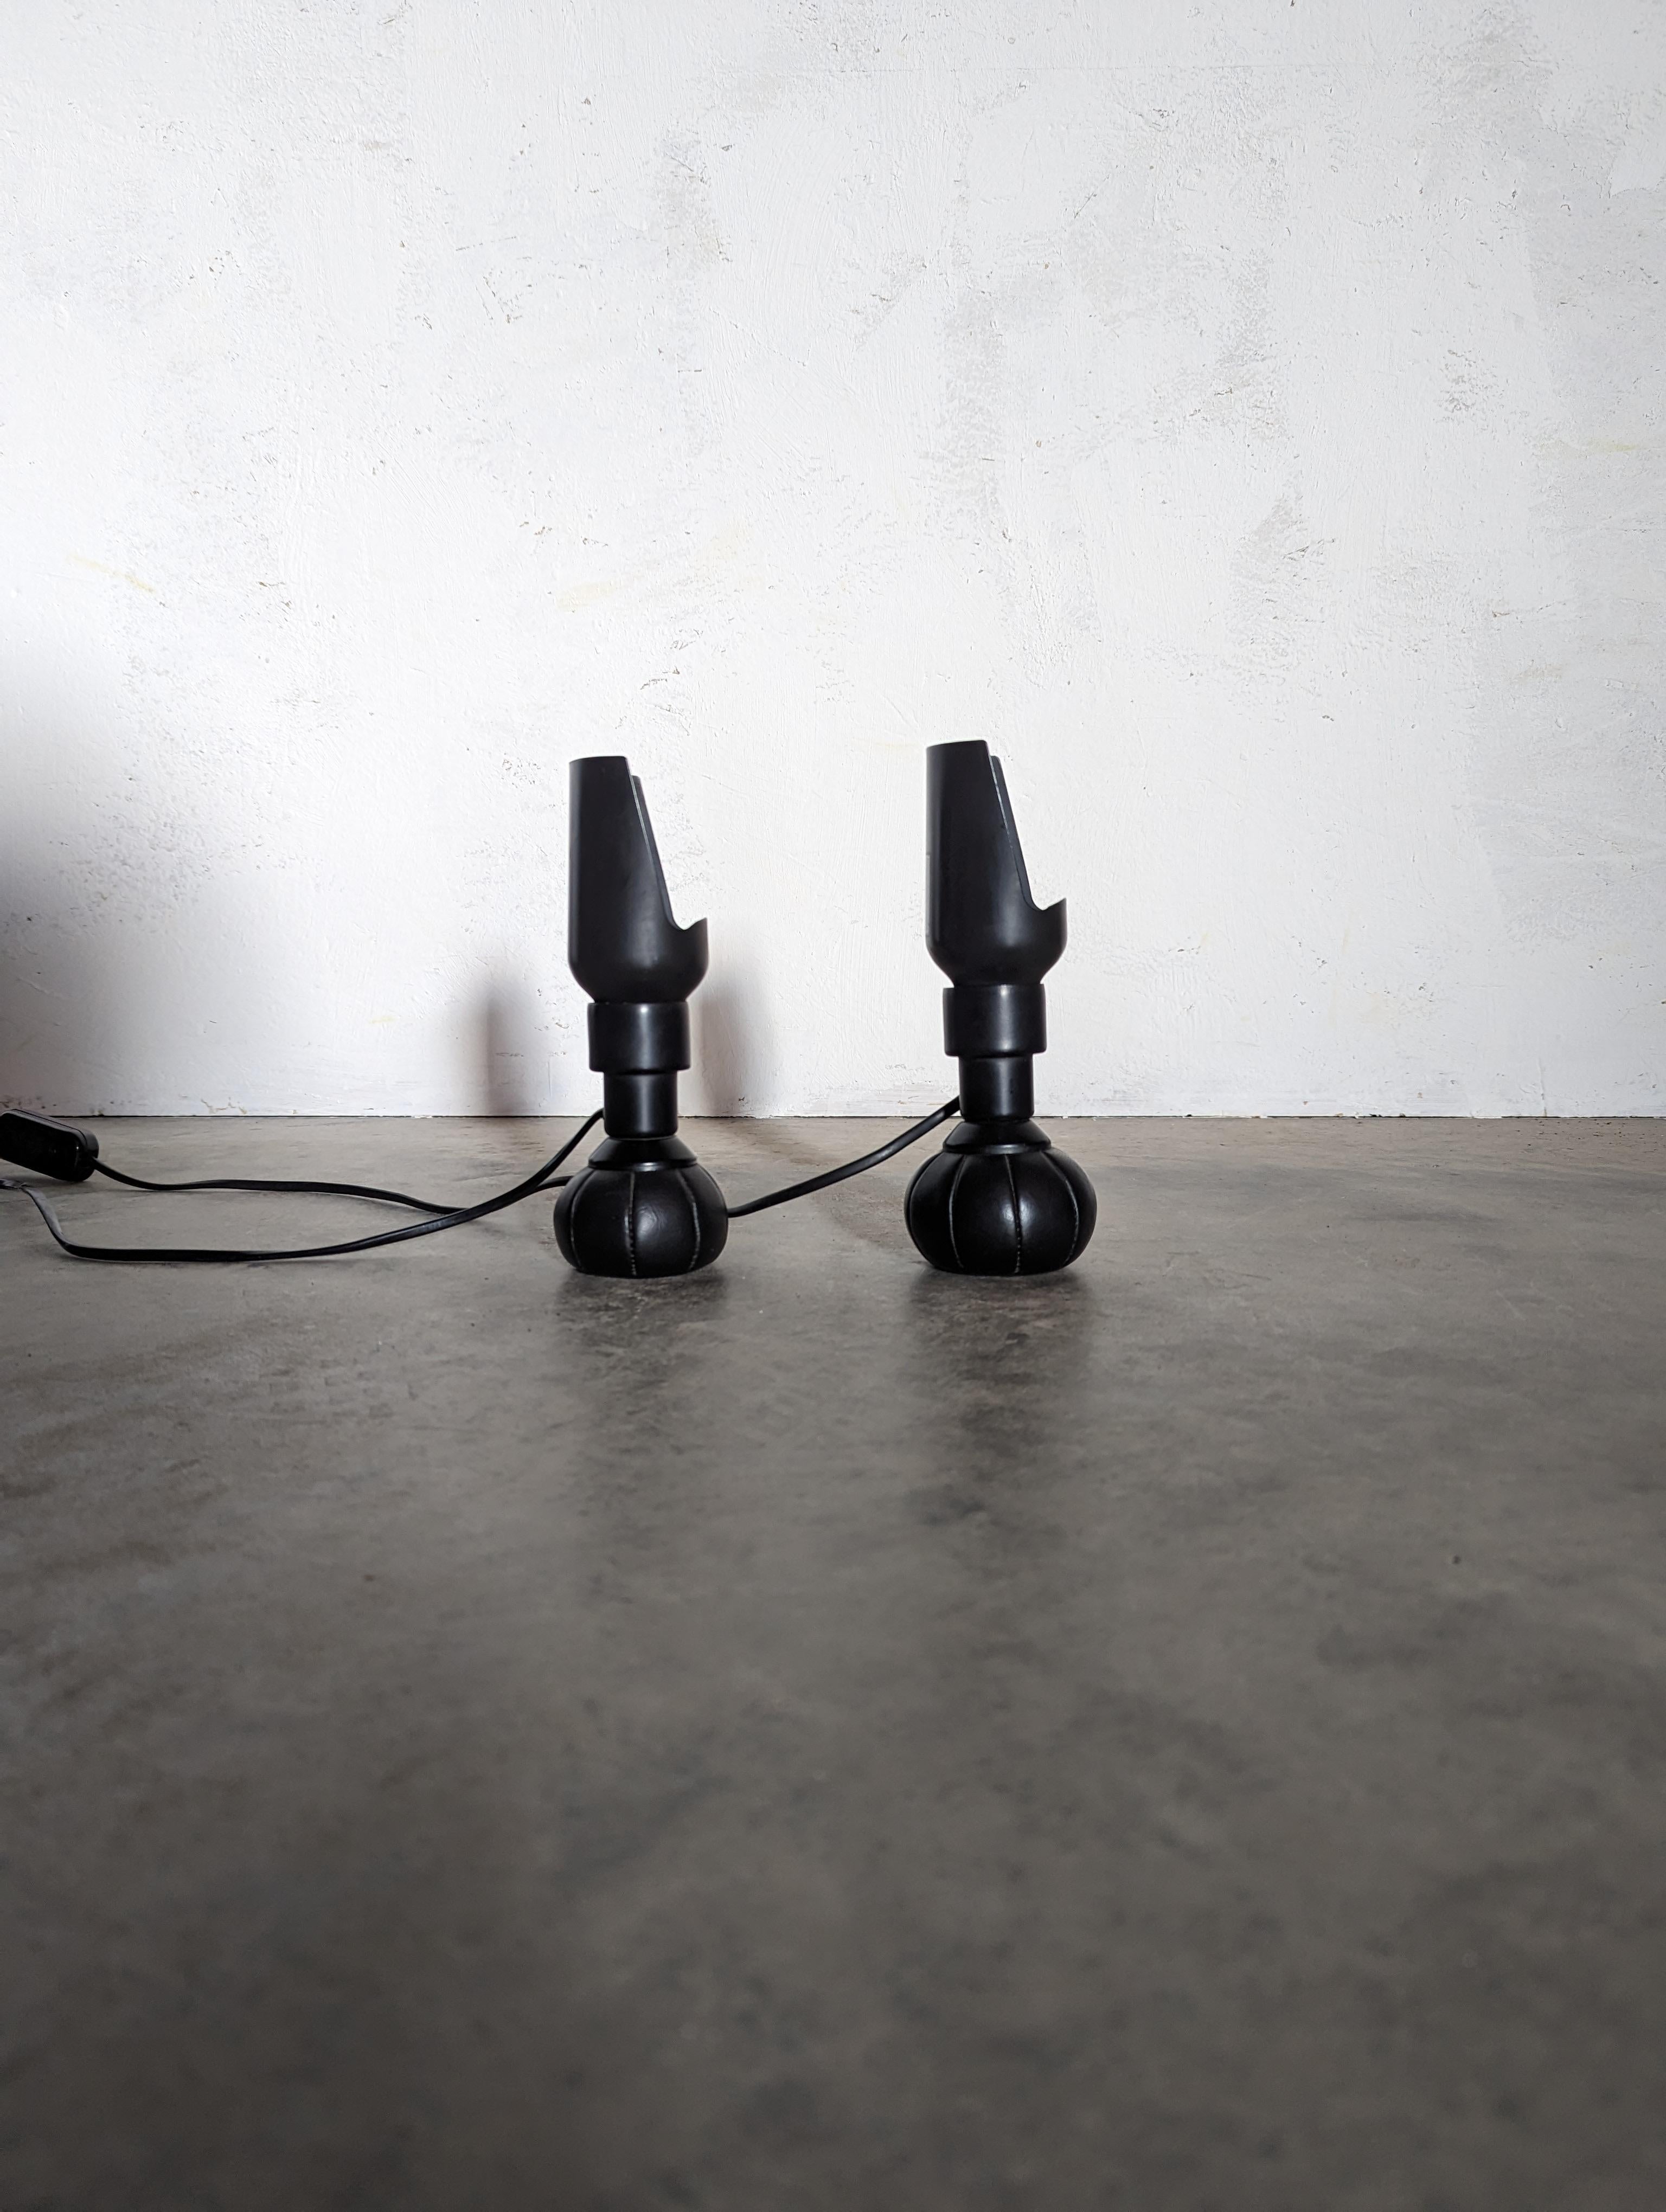 A pair of black 600/P adjustable model by Gino Sarfatti for Arteluce
the 600 model, a direct light table lamp designed in 1966, has a base of a pouch made of sky leather filled with little small balls. This base allows the unit to be positioned in